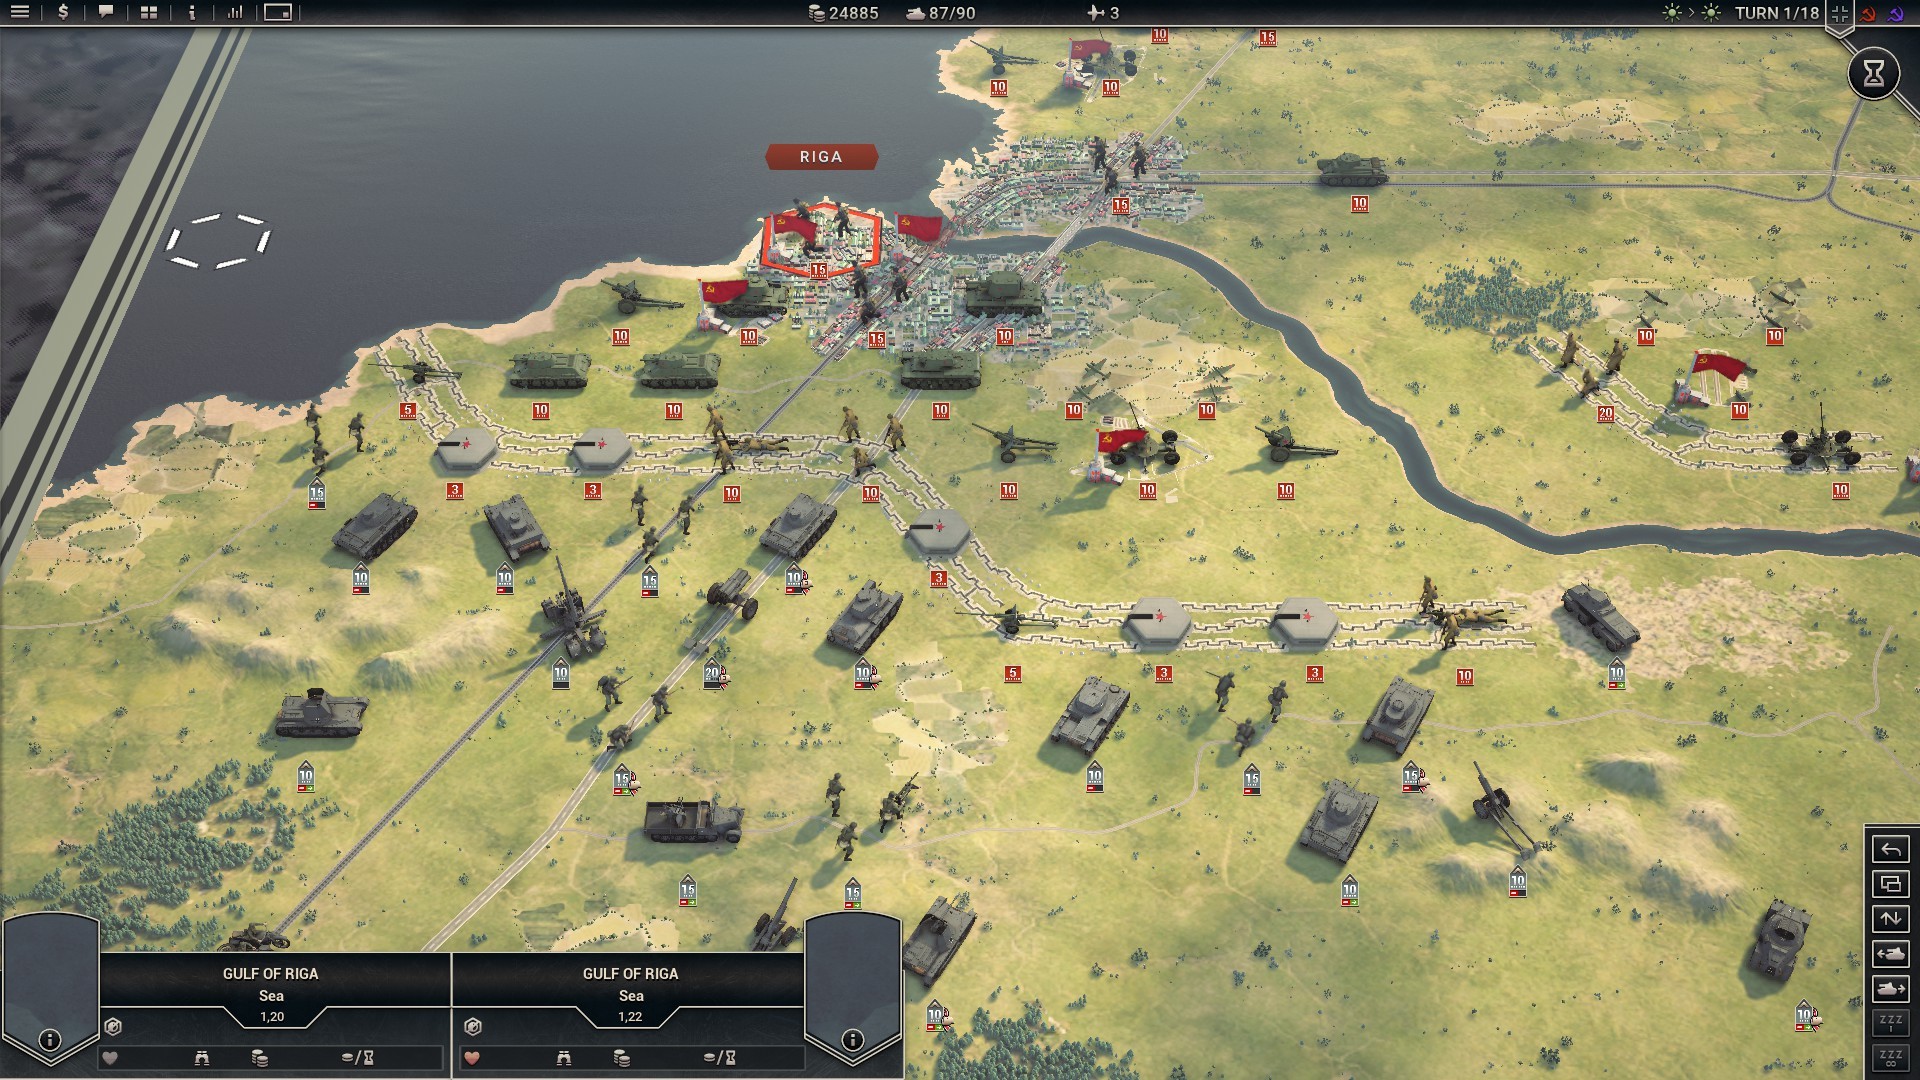 Panzer Corps 2 - Axis Operations 1941 DLC Steam CD Key 4.4$